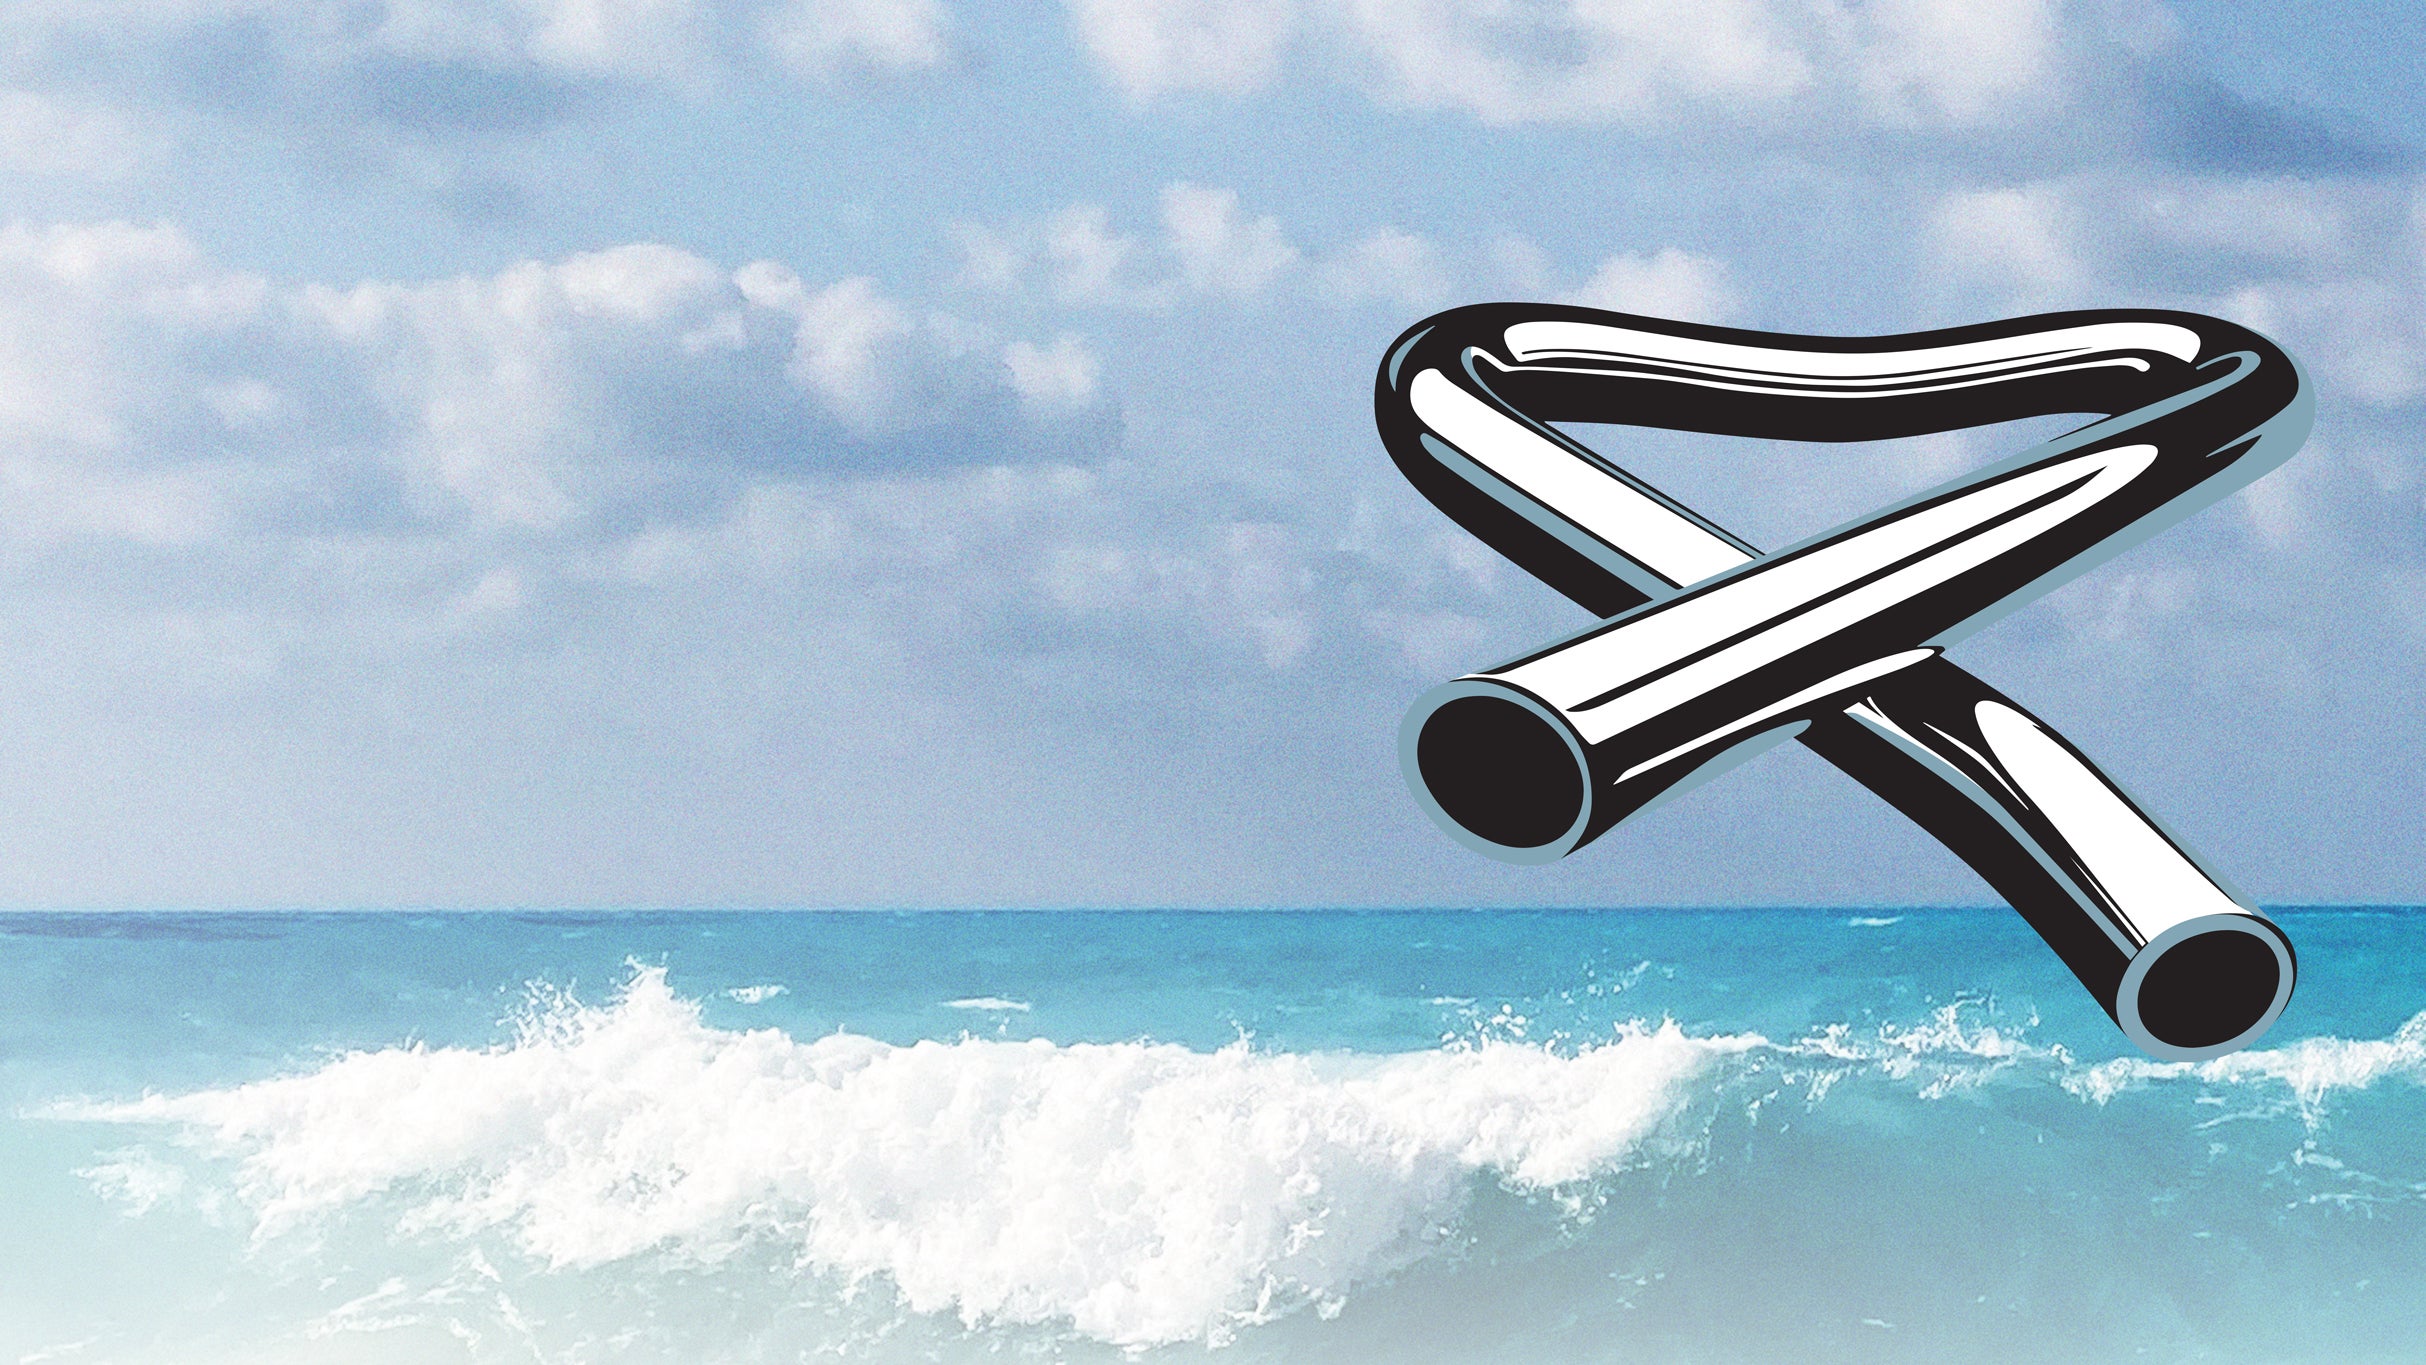 Mike Oldfield's Tubular Bells Live in Concert in Takapuna Beach promo photo for Exclusive presale offer code